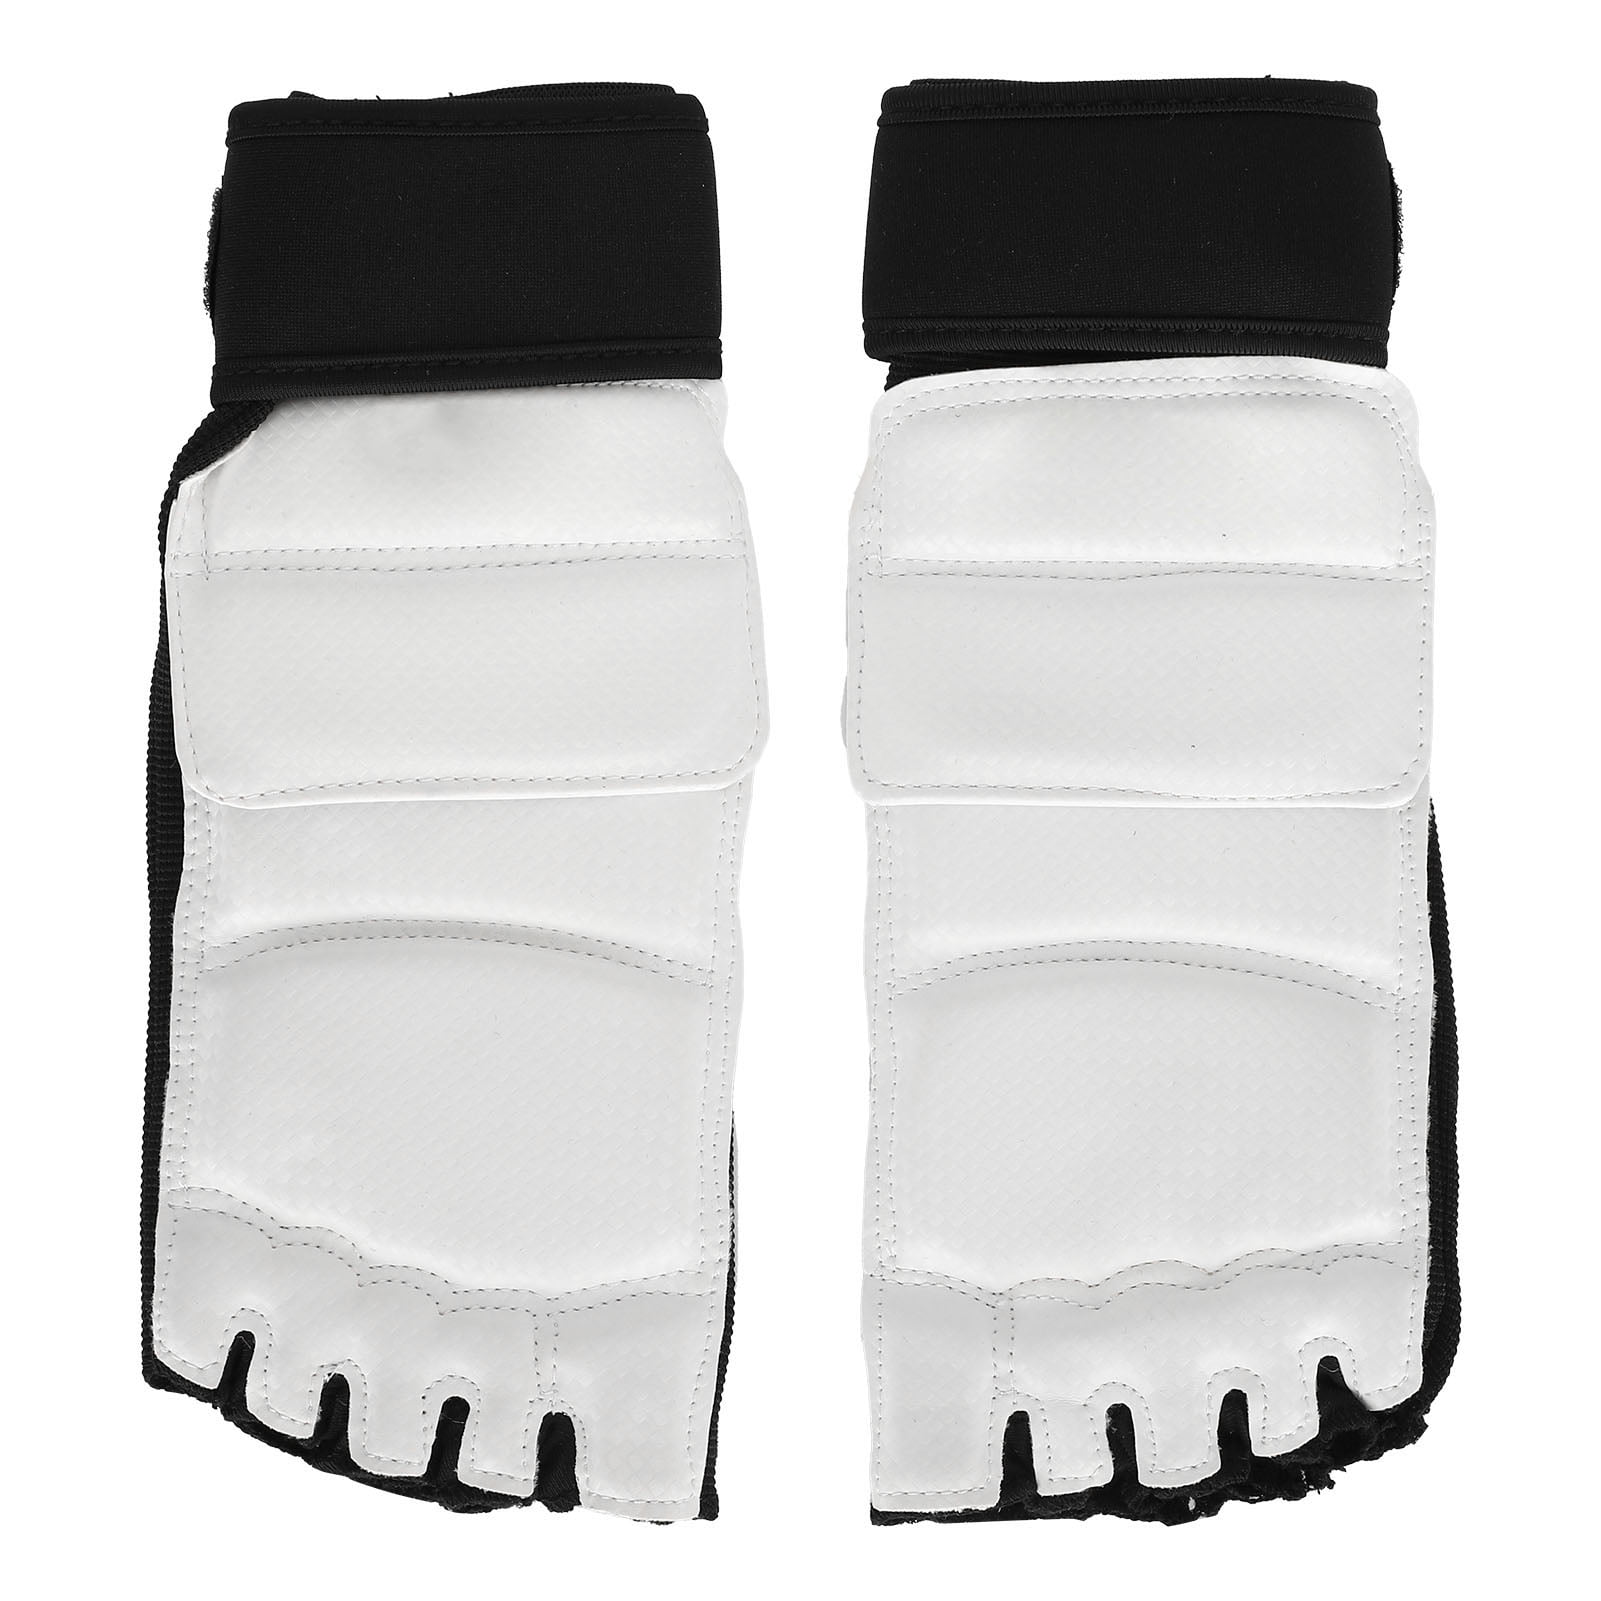 Details about   2pcs Taekwondo Foot Guard Boxing Protection Ankle Support for Adult Children Gym 